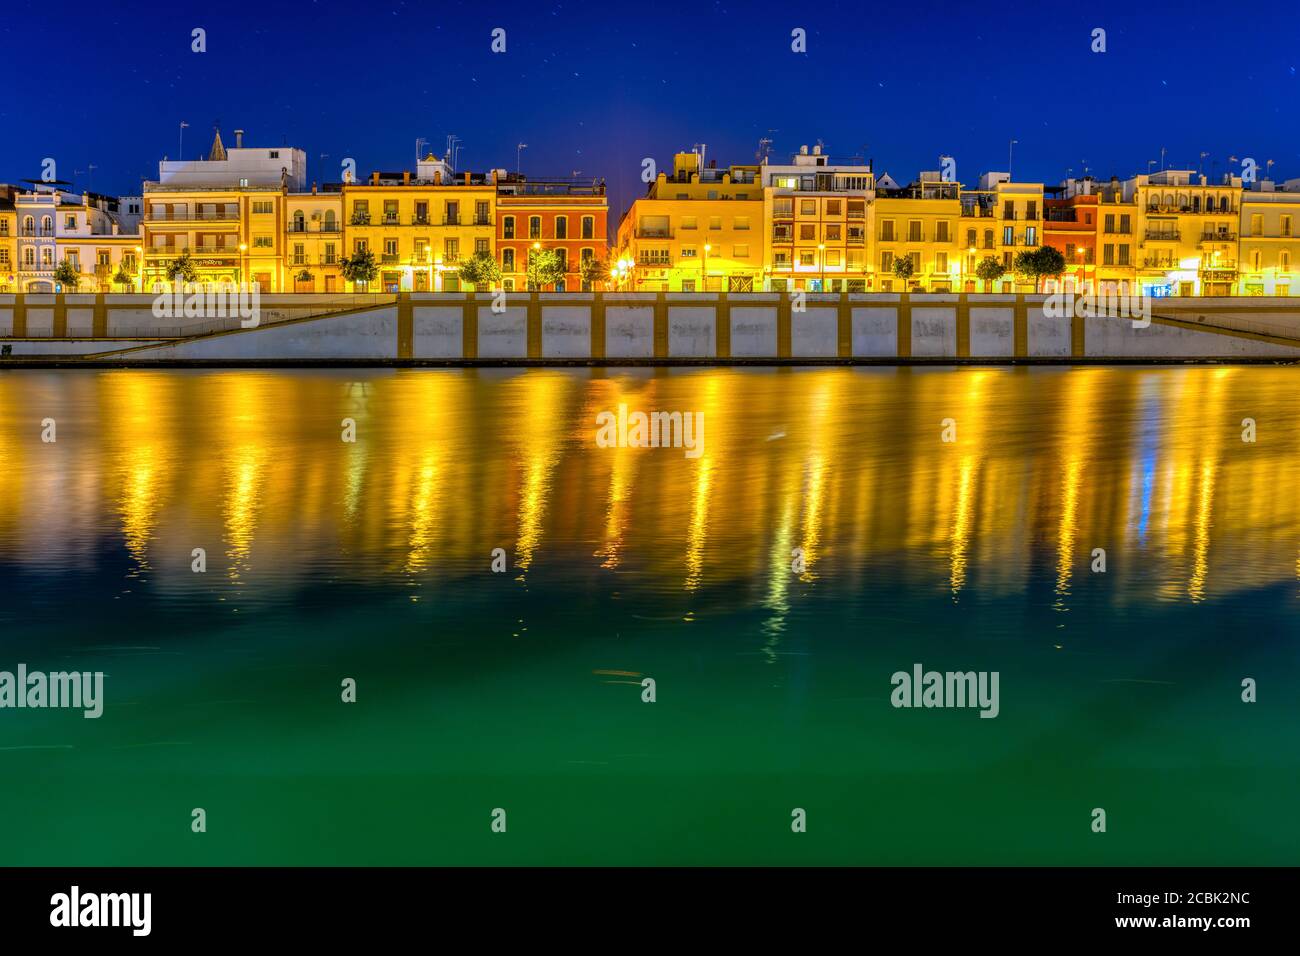 Betis street by the Guadalquivir river at night, Seville, Spain. Stock Photo